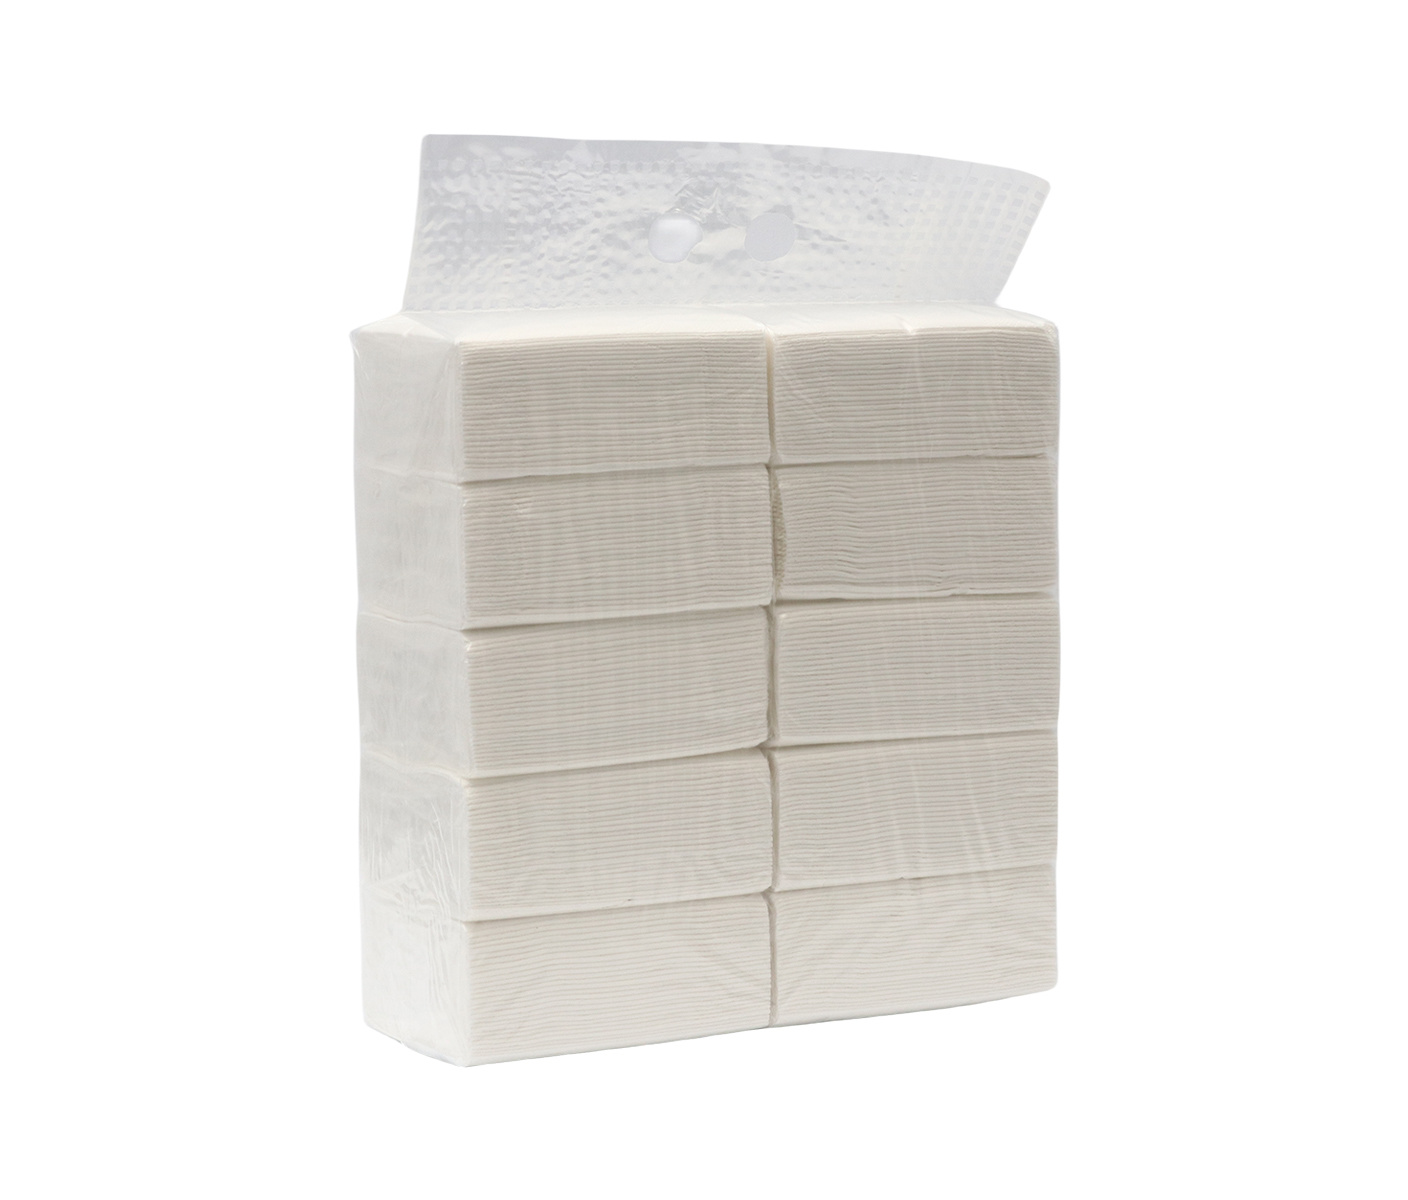 Choosing the Best Commercial Toilet Paper for Your Business Needs